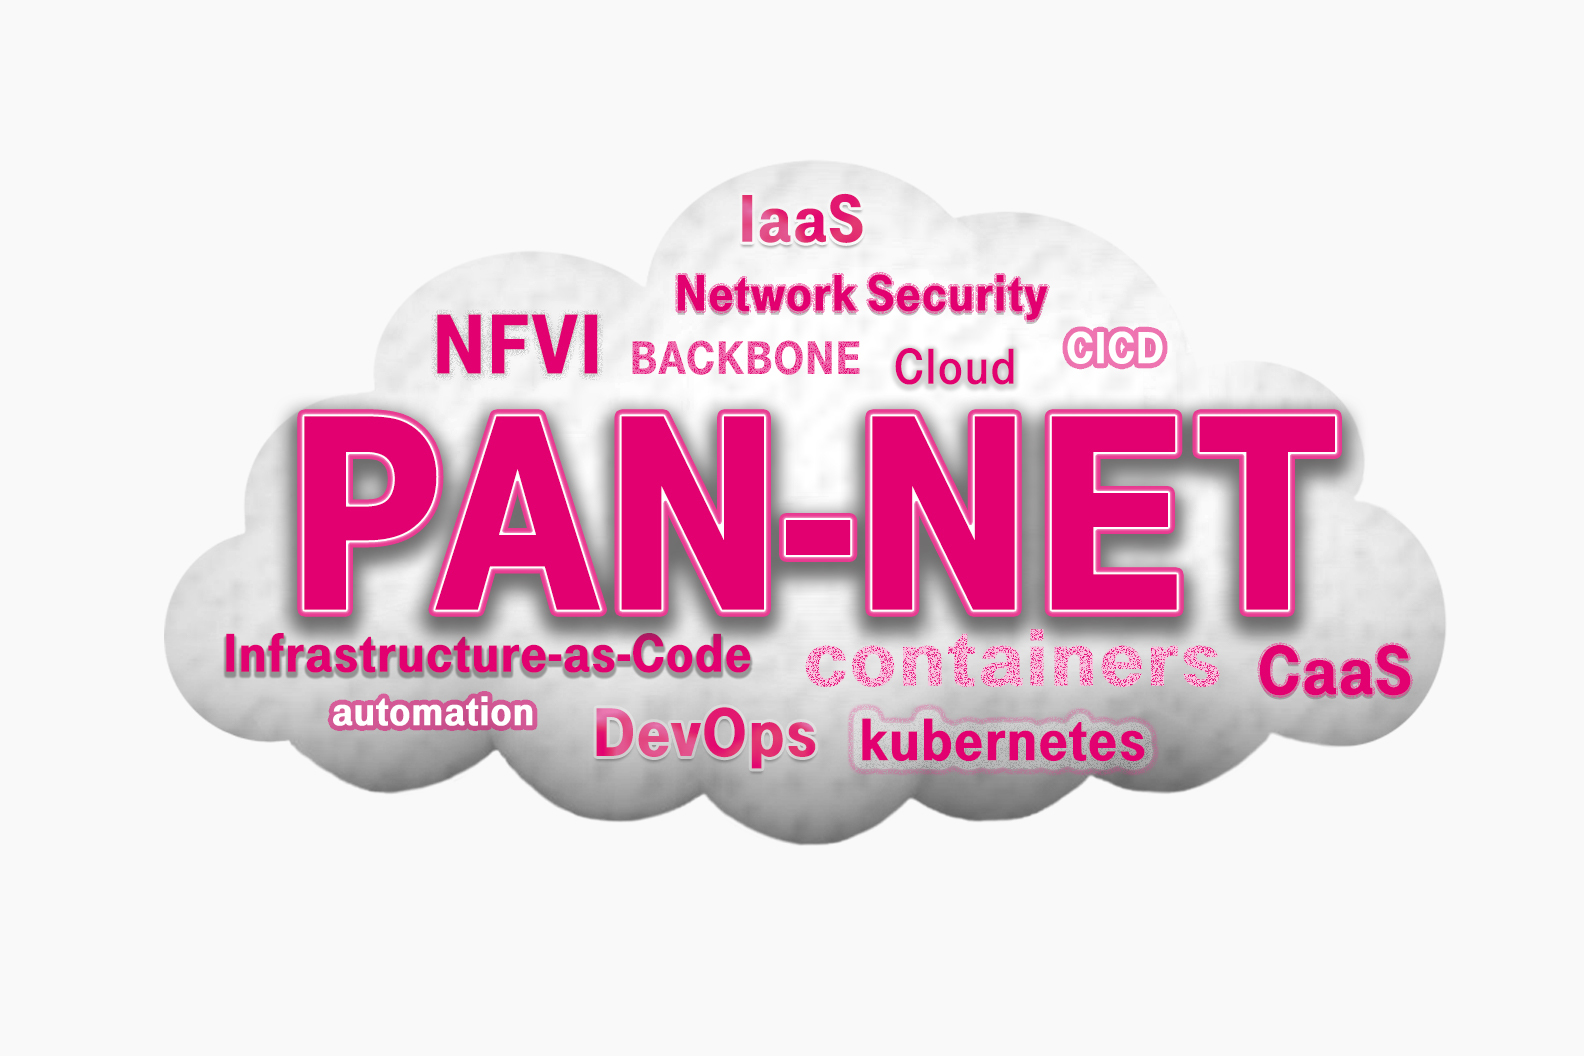 Pan-Net is a cross-border clud based telecommunication company. Its services spread from messaging, VoLTE, email and others. The focus is on availability, scalability and deployment of applications. Within the Magenta Cloud community we propose the solutions and security controls to tackle security dilemmas.